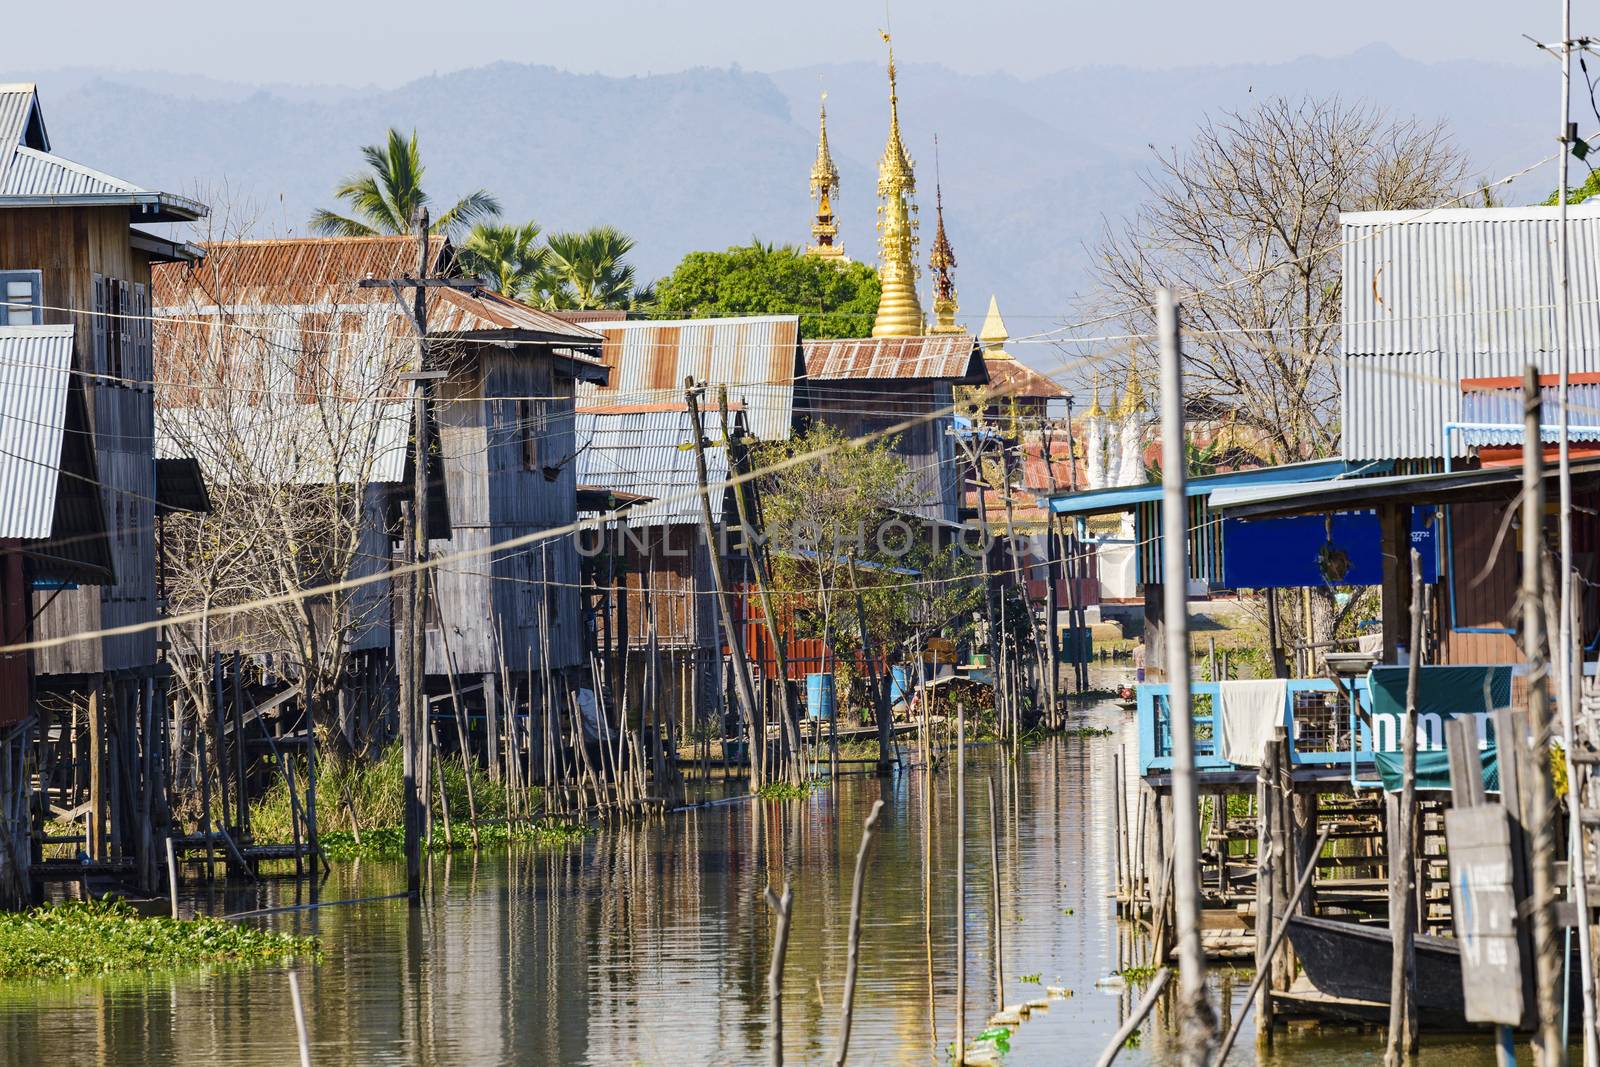 Traditional wooden stilt houses at the Inle lake, Shan state, Myanmar (Burma).